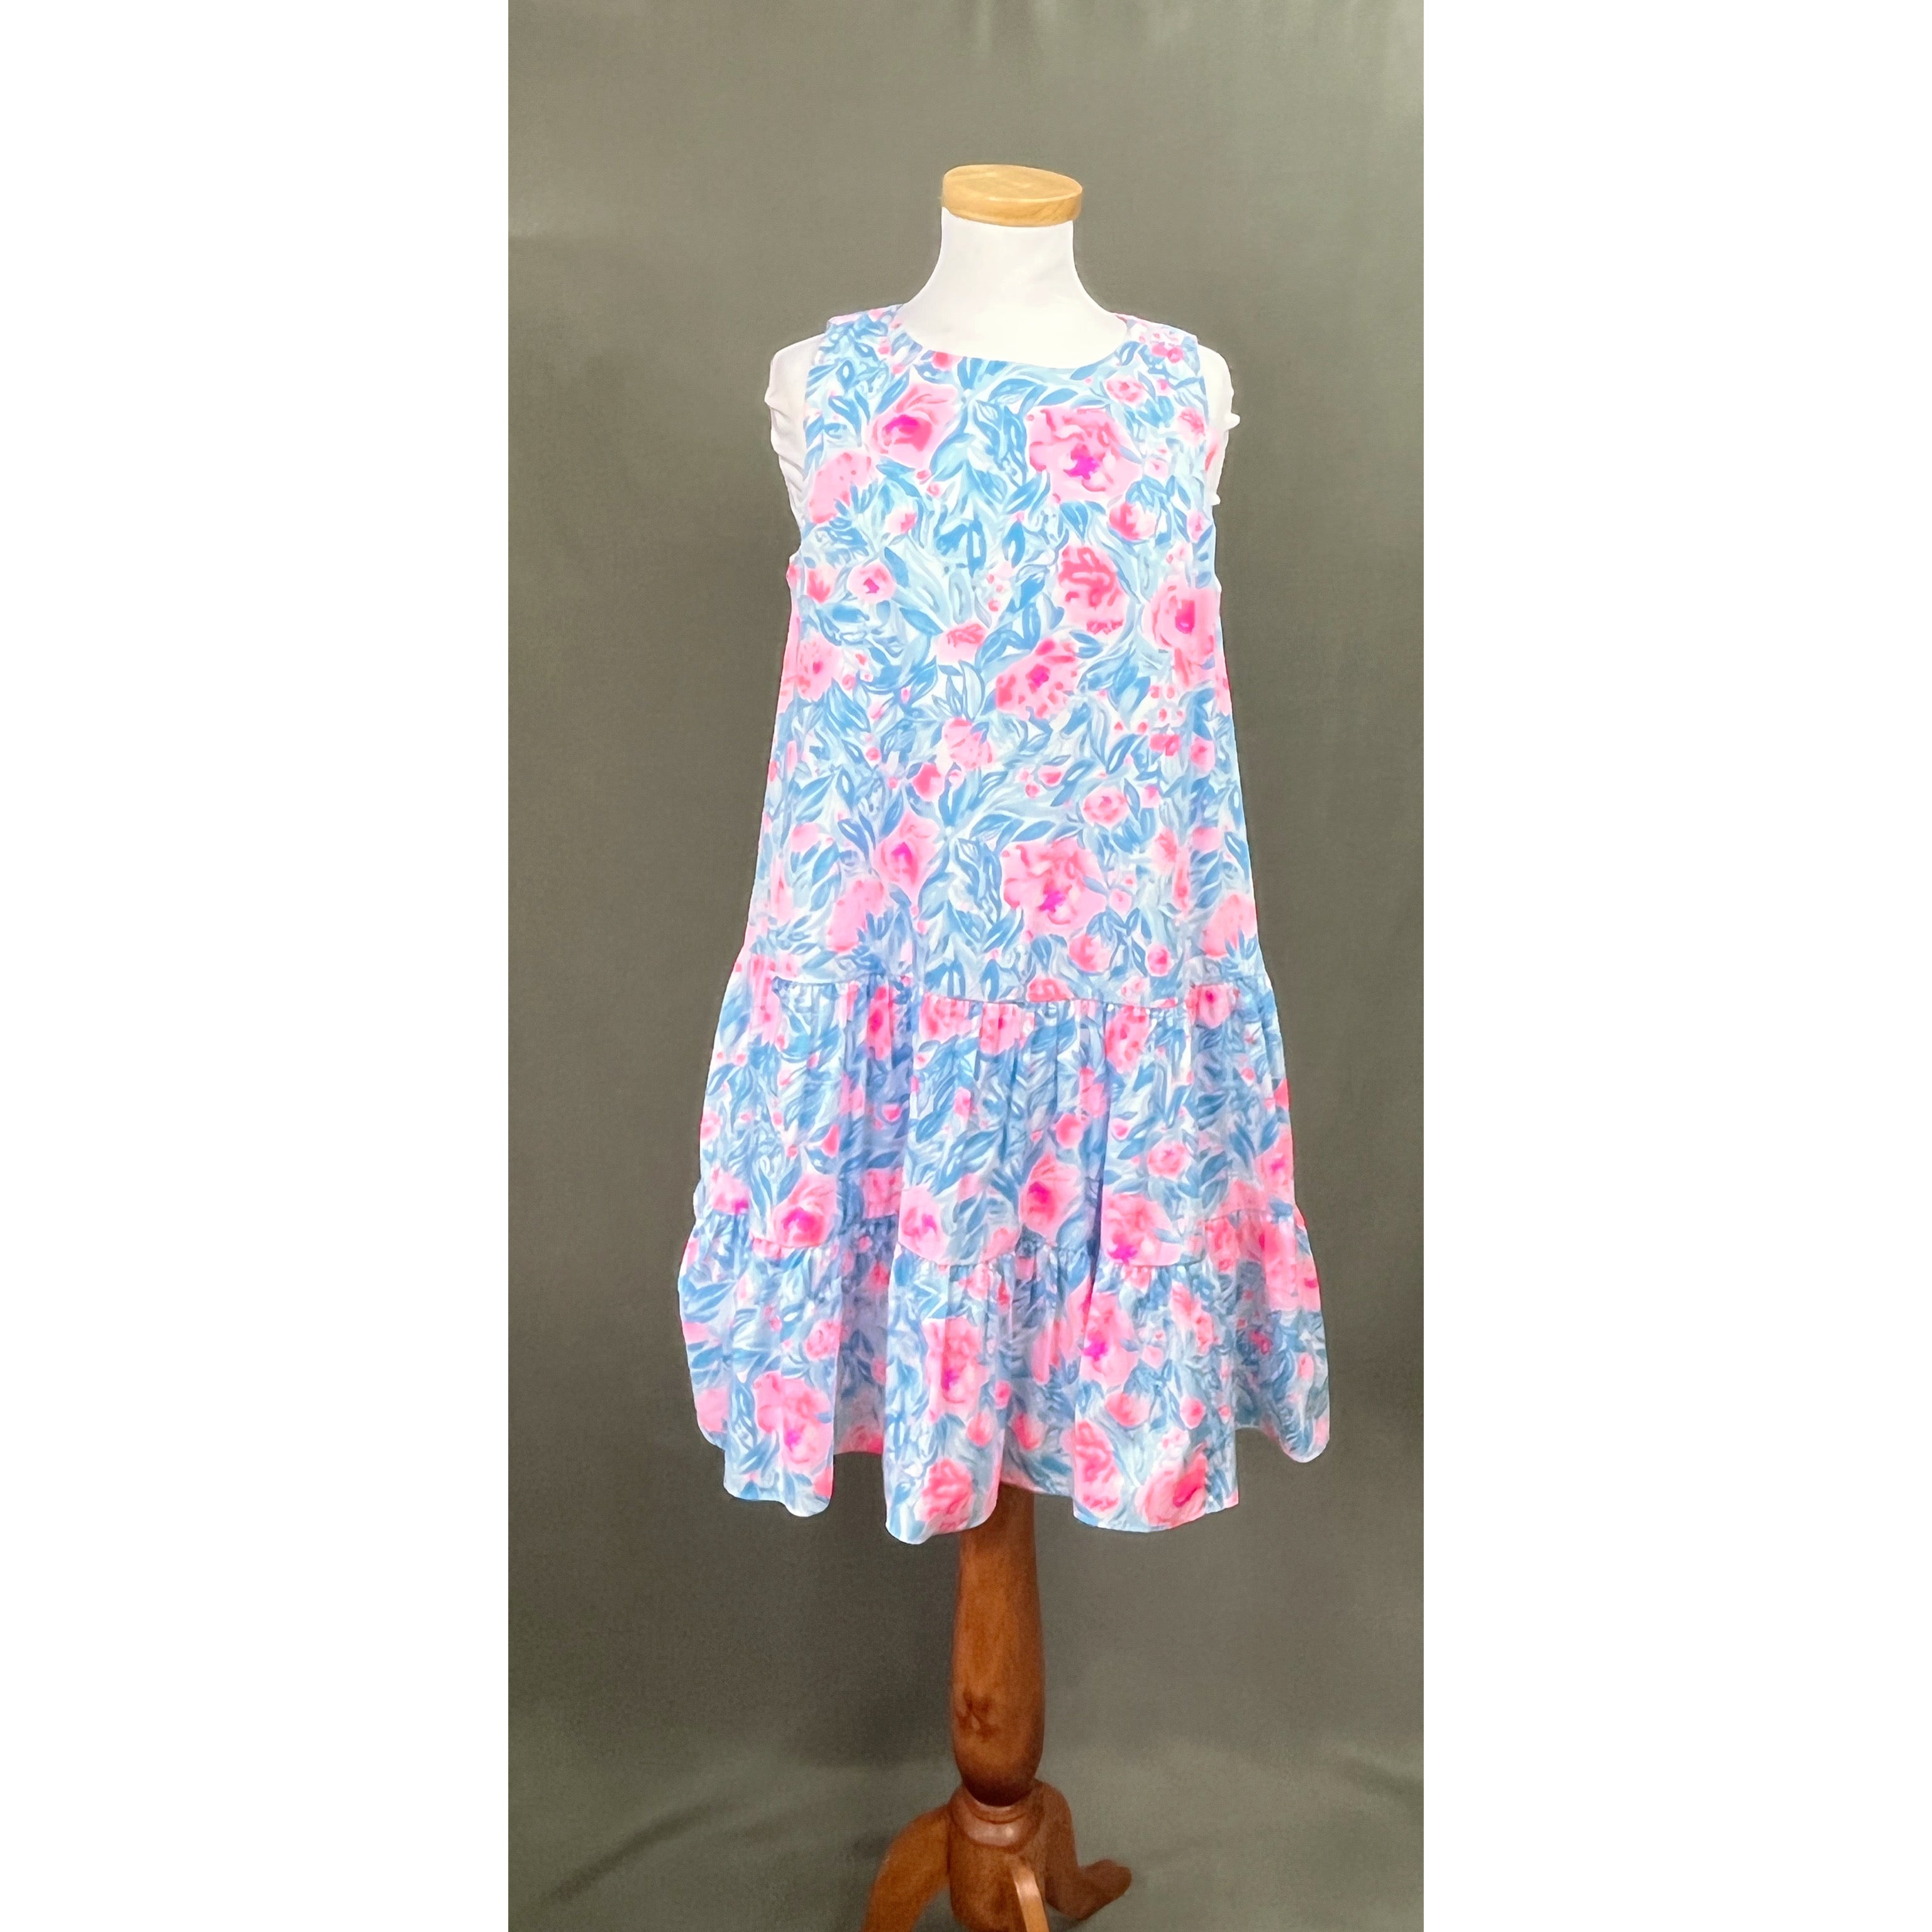 Lilly Pulitzer pink and light blue Trina dress, size M